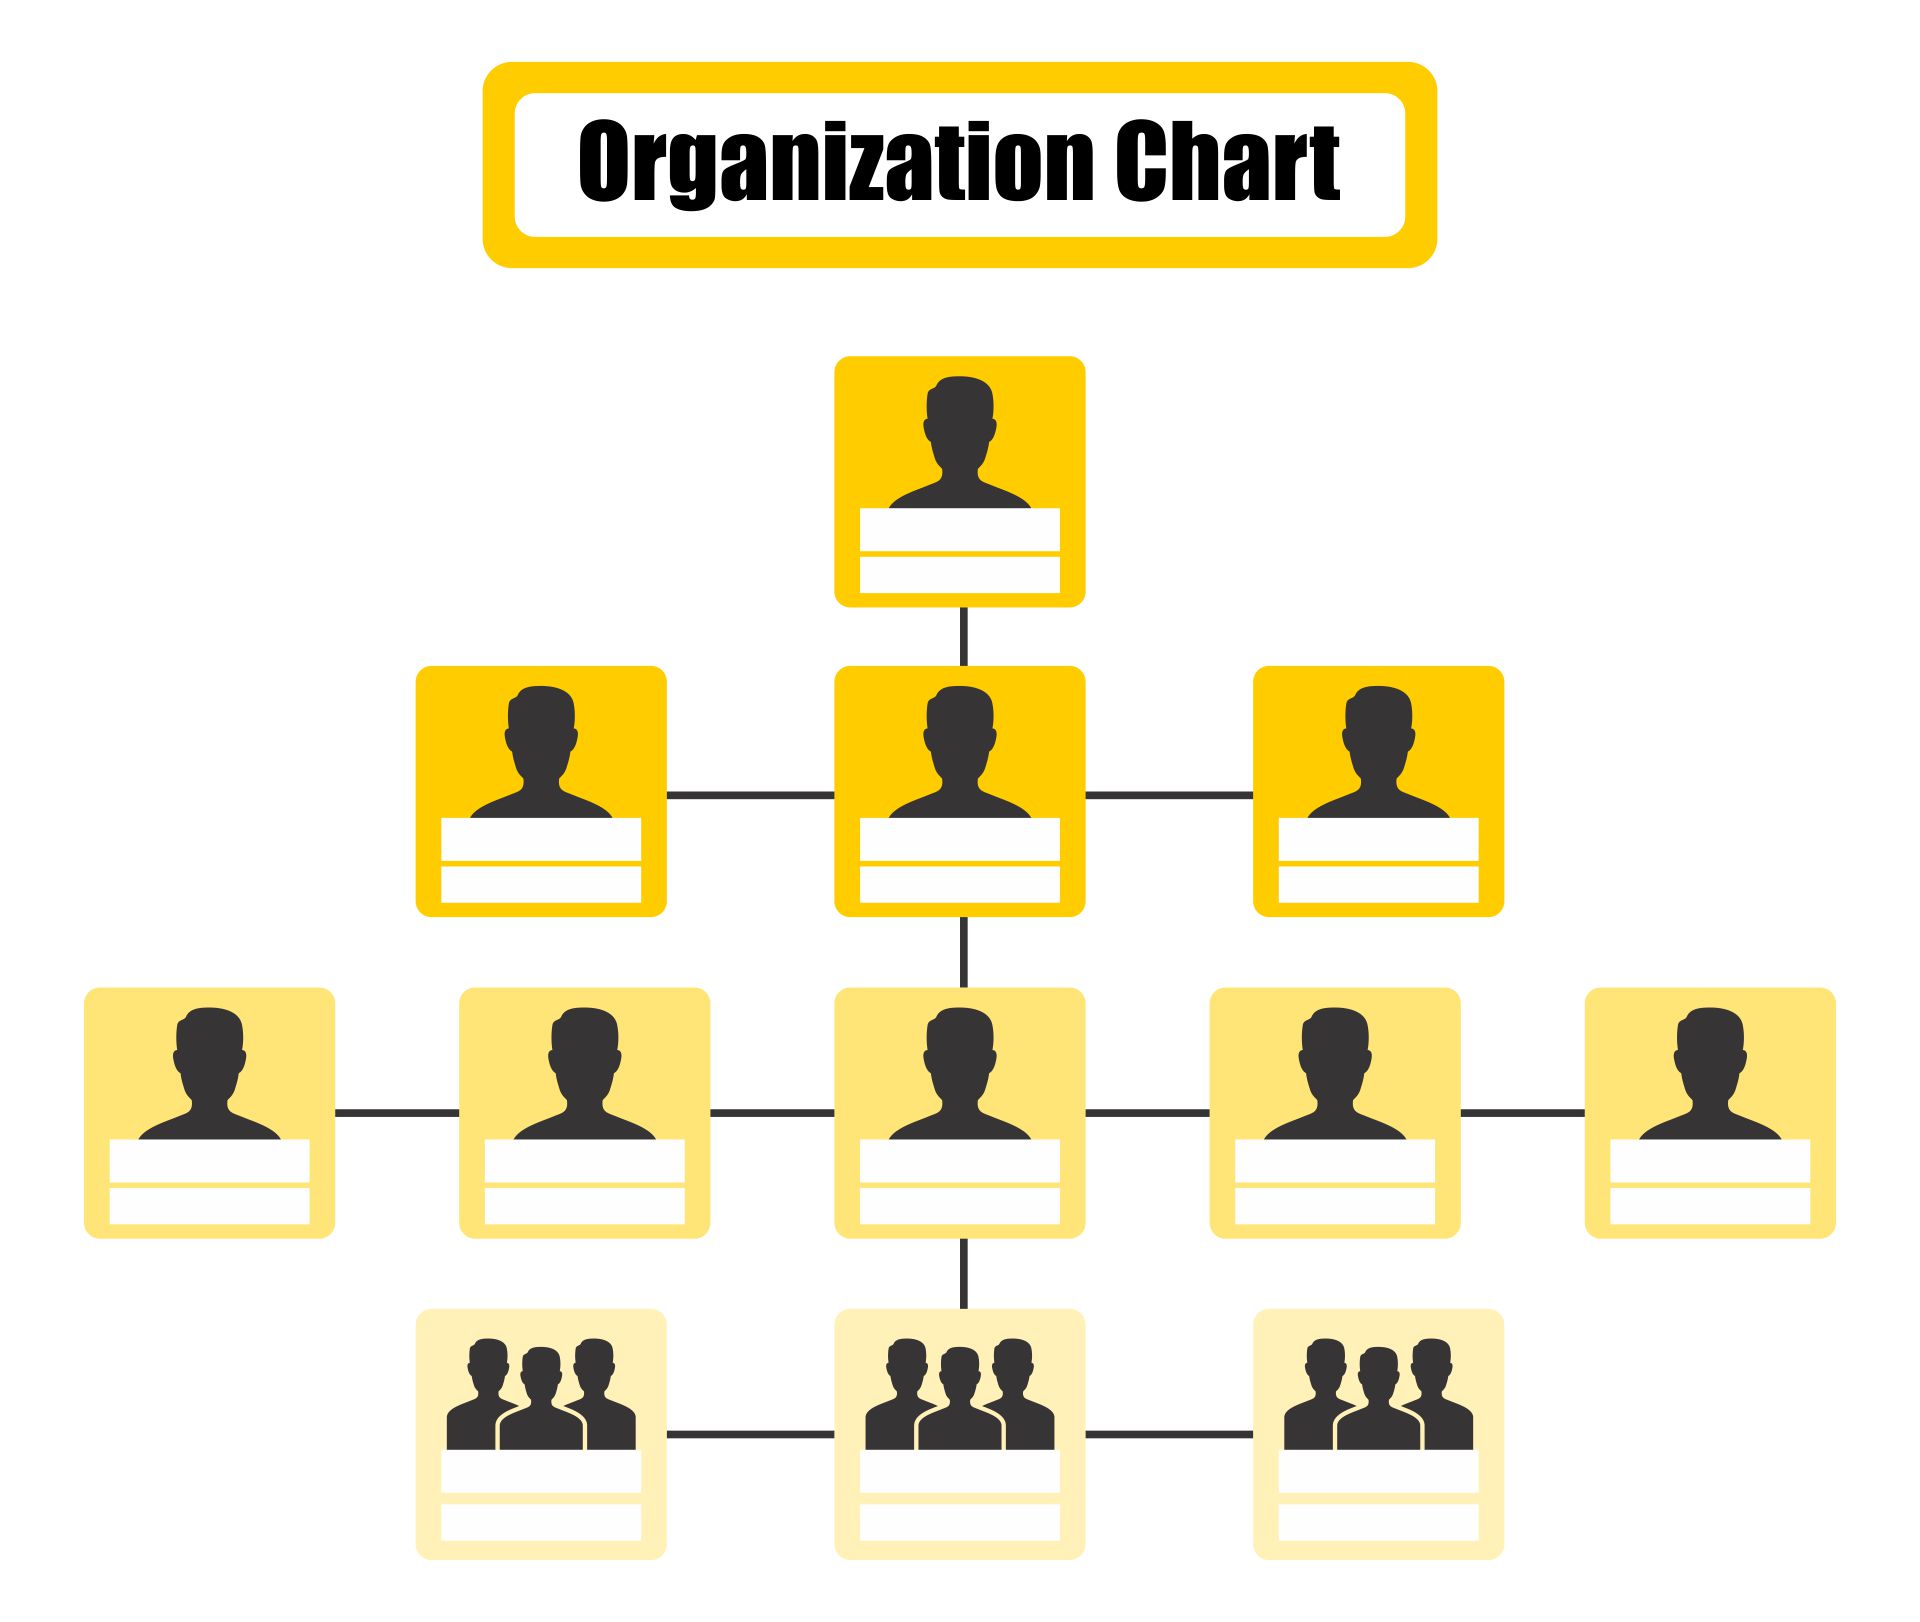 Table of Organization Chart Template